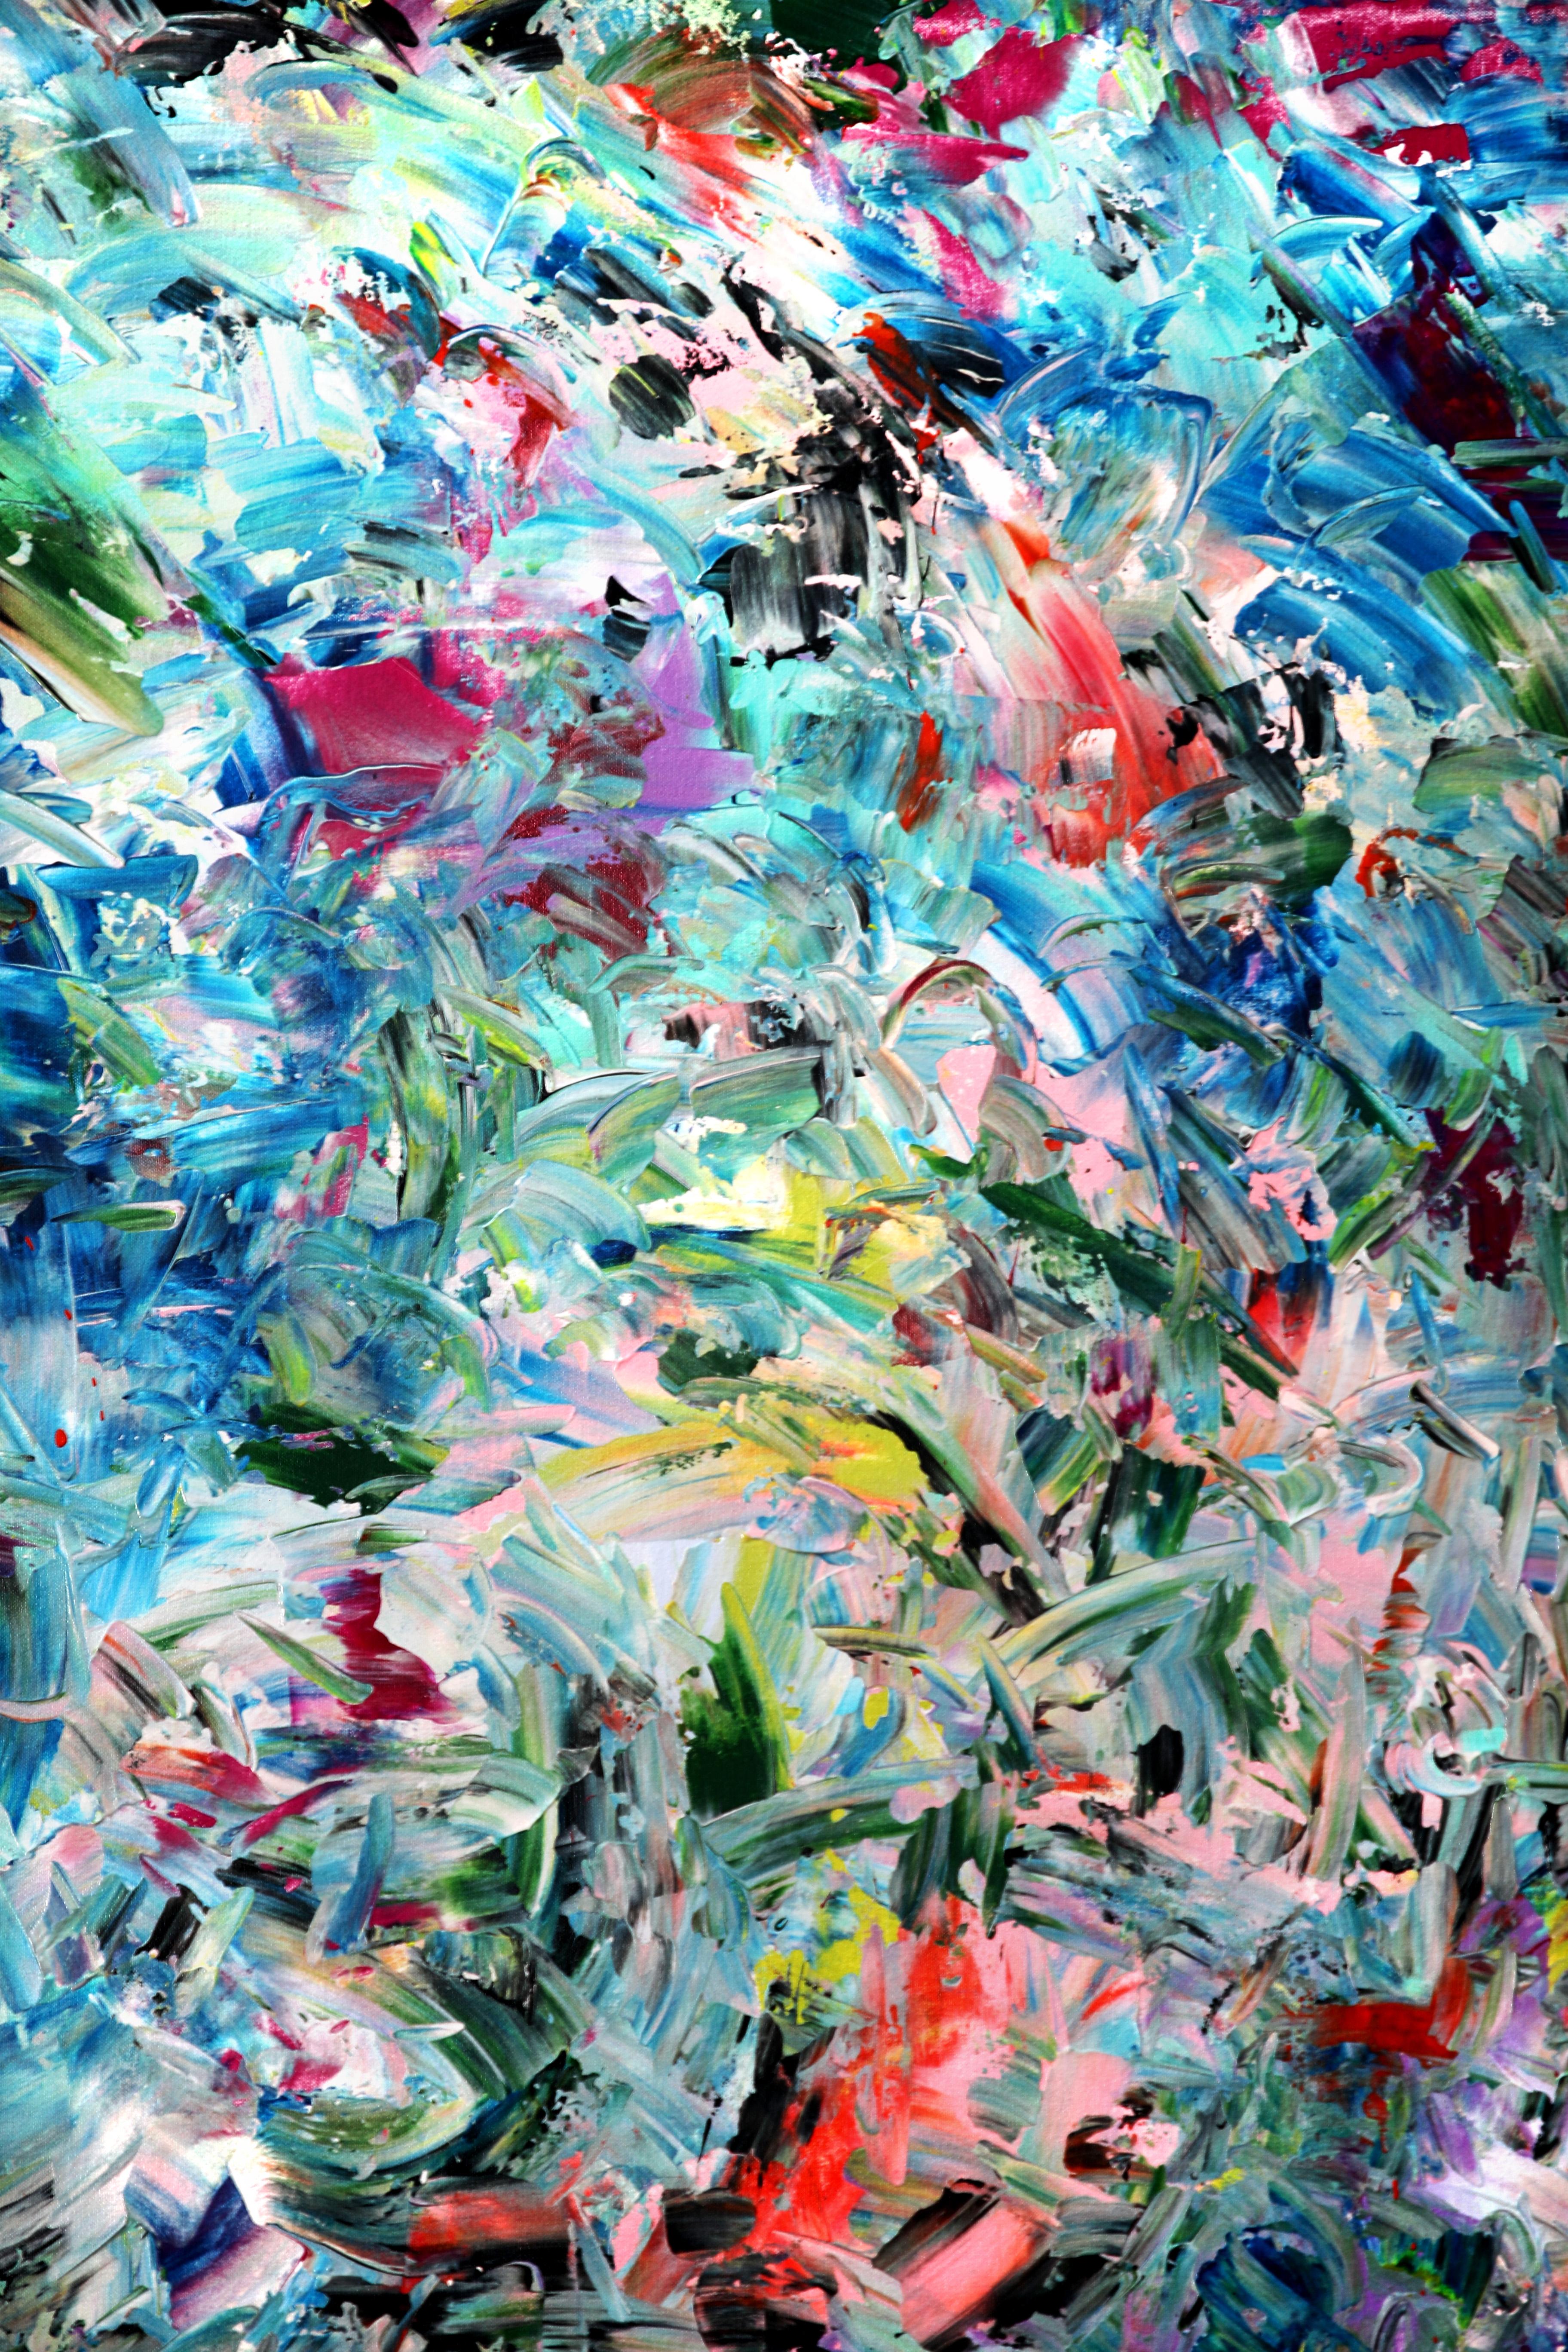 Invigorating Motion - Abstract Expressionist Painting by Estelle Asmodelle